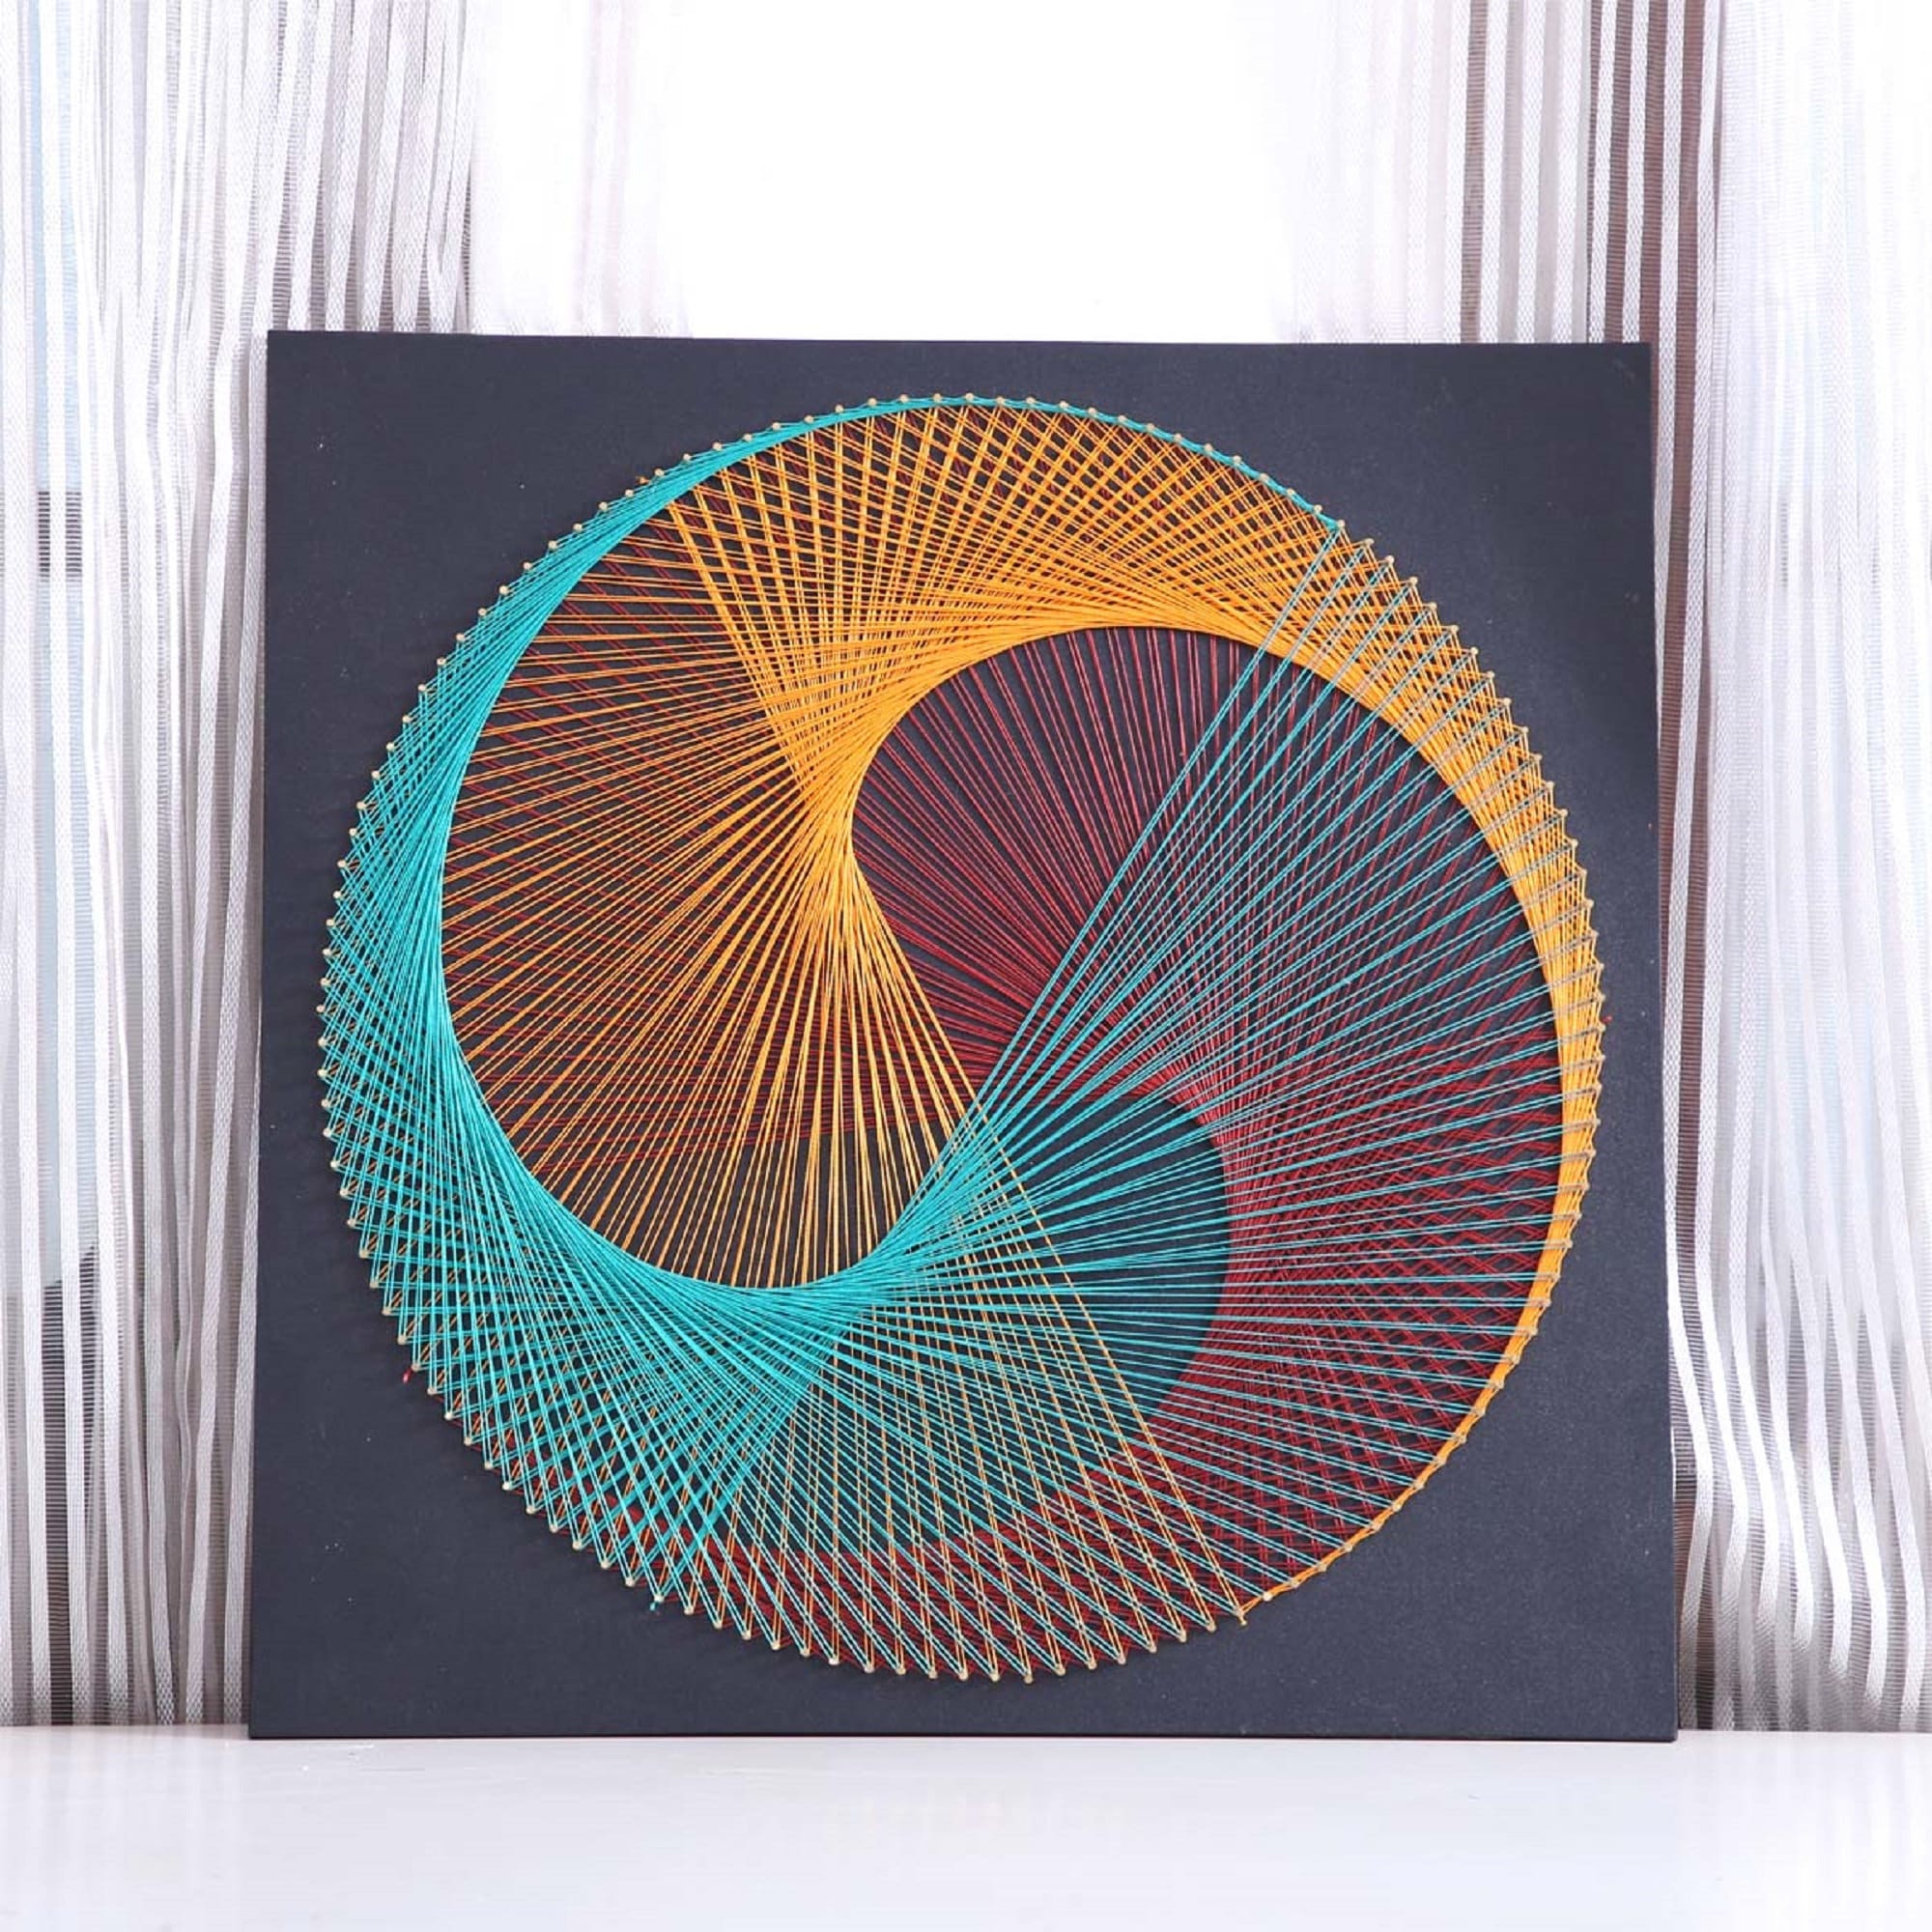 Wood Stitched String Art Kit with Shadow Box Vortex - adult or